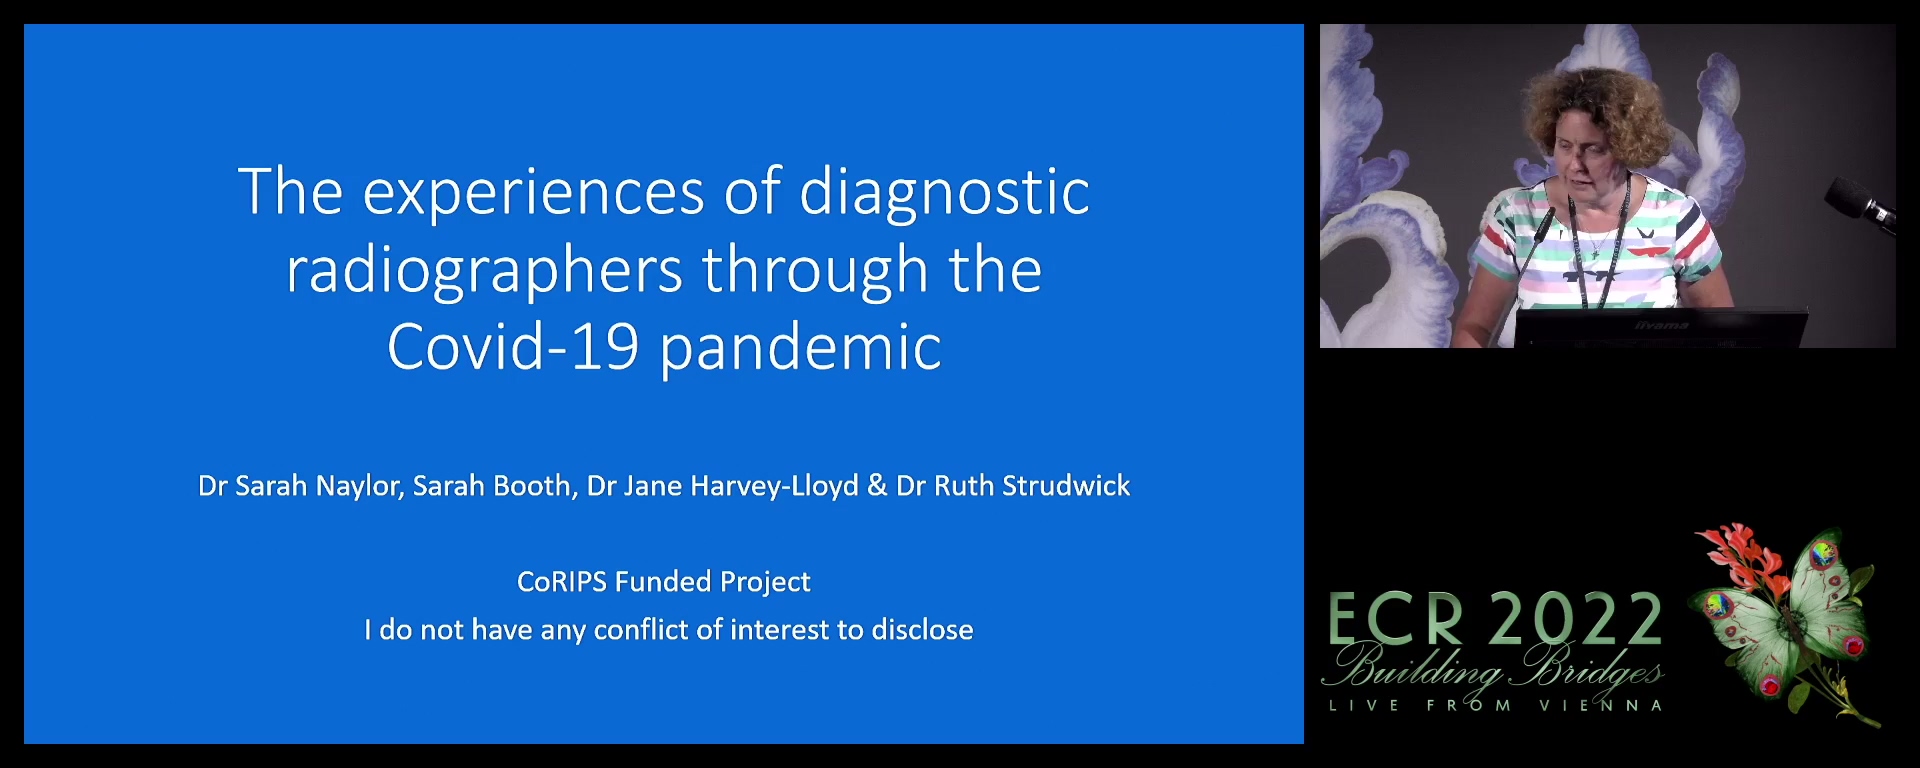 The experiences of diagnostic radiographers through the Covid-19 pandemic - Ruth Strudwick, Ipswich / UK